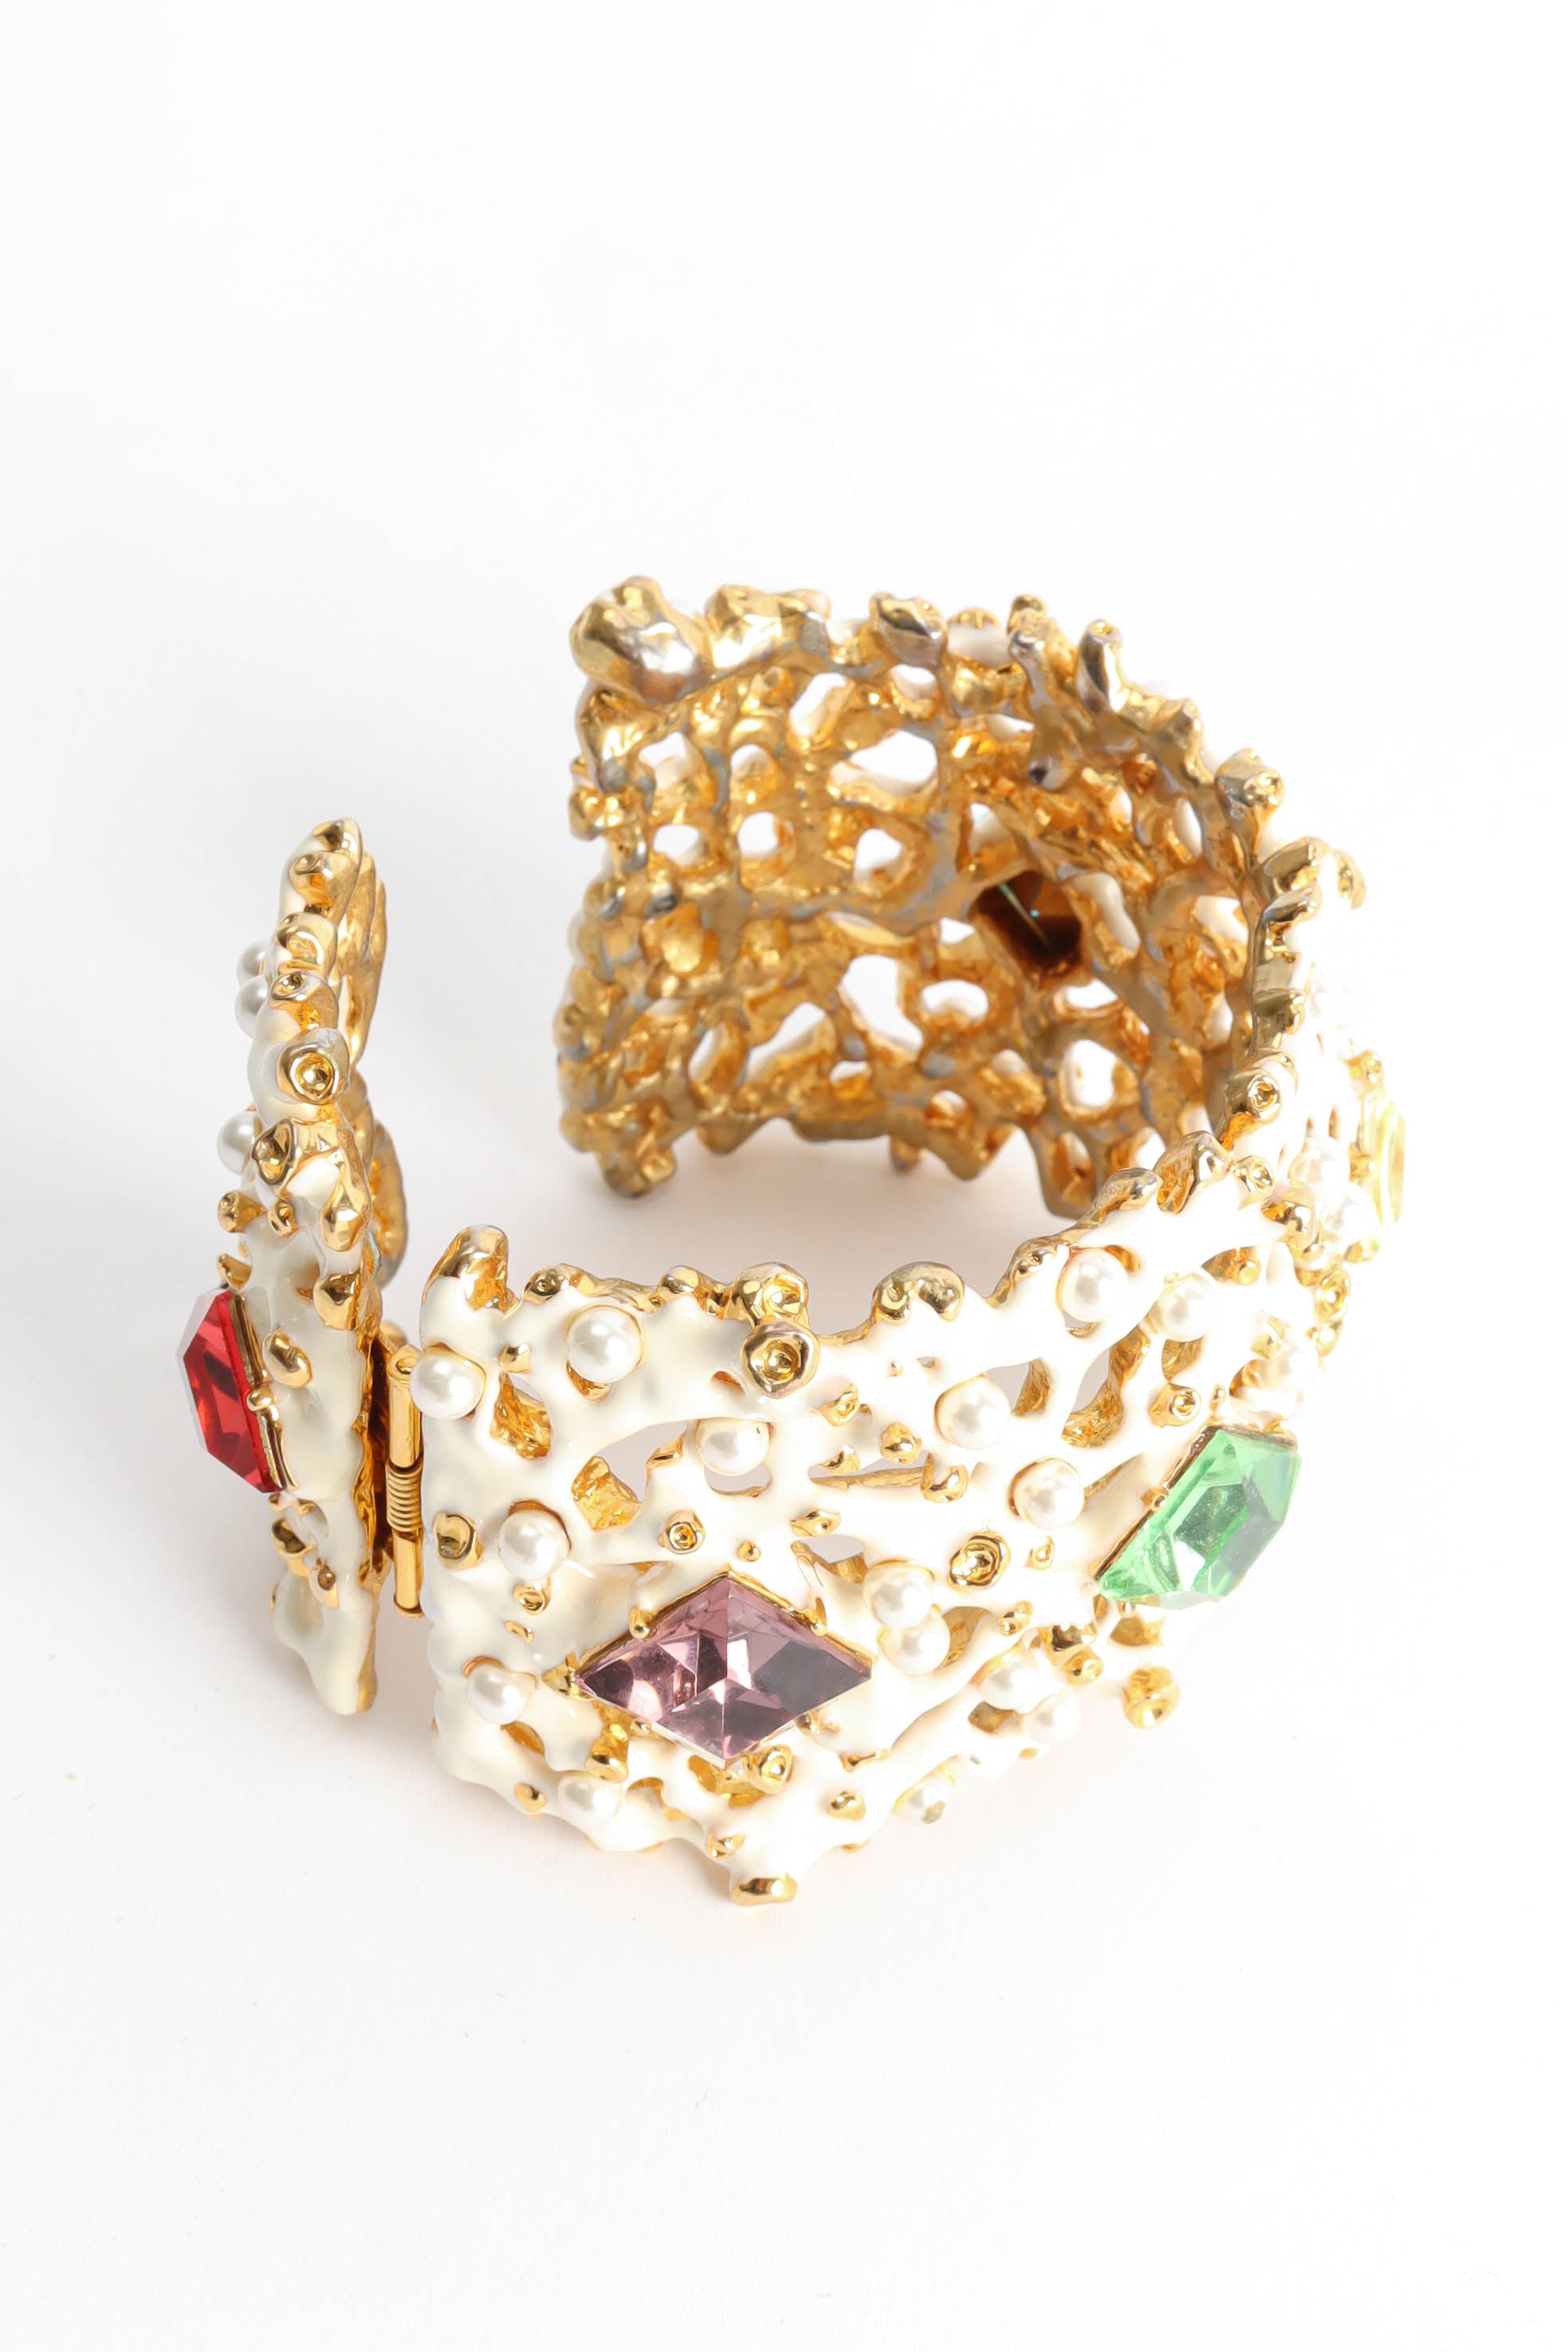 Vintage Kenneth Jay Lane Enamel Pearl Stone Cuff facing down/slight discoloration @ Recess Los Angeles